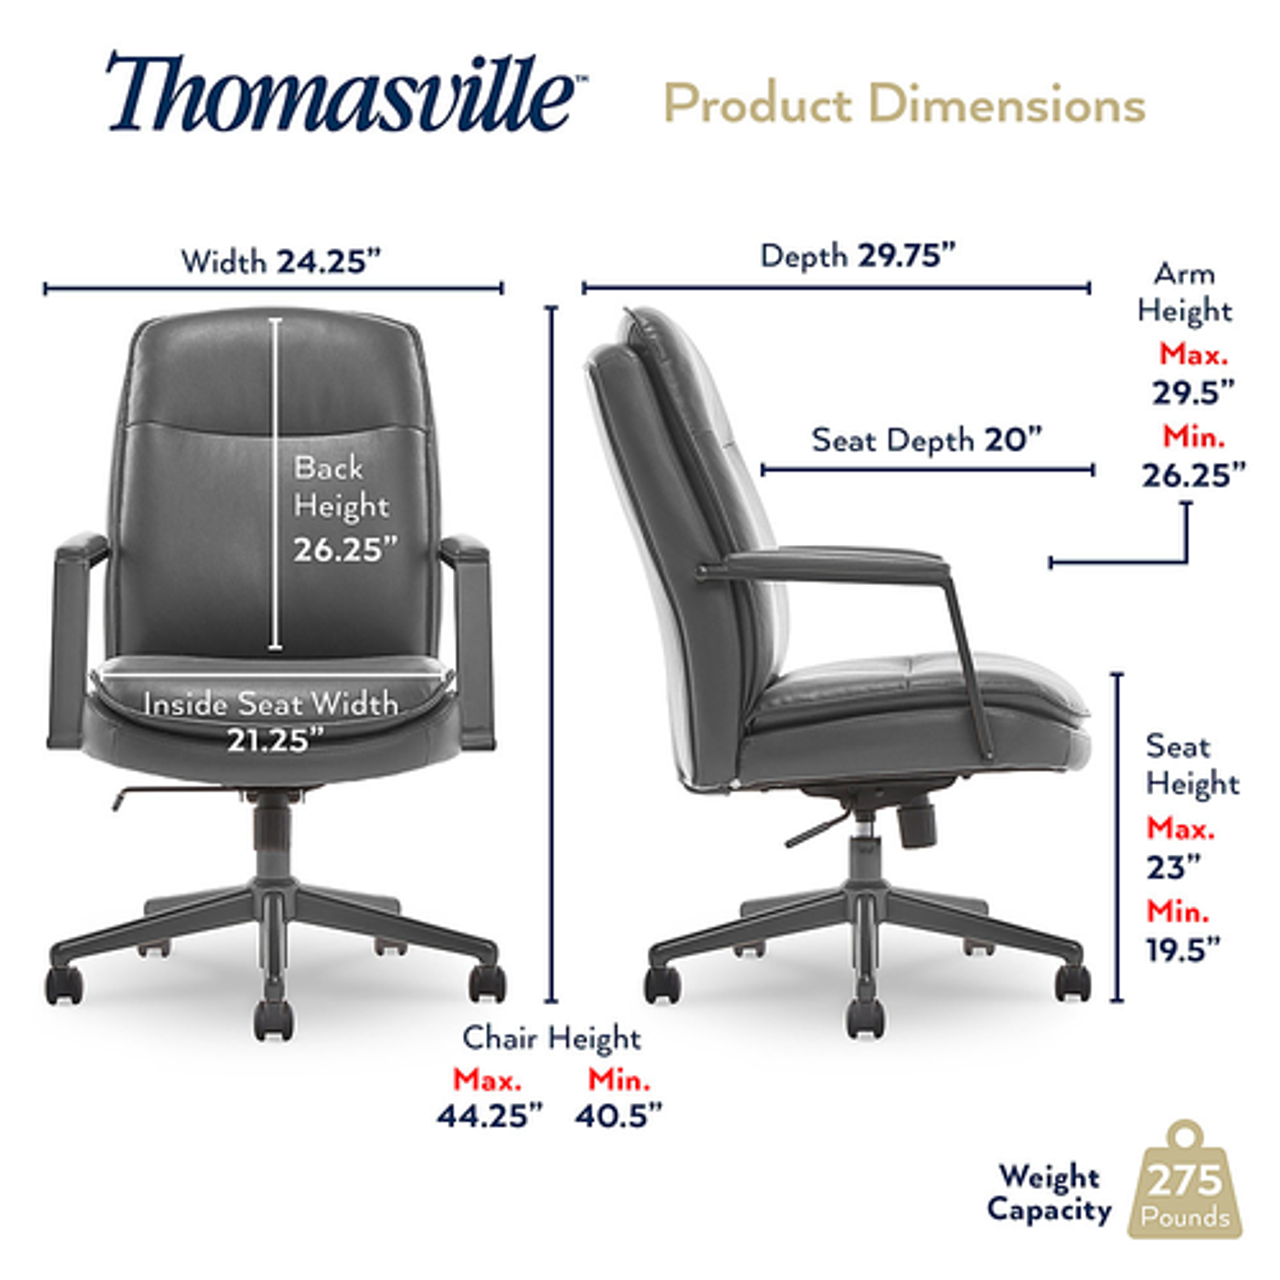 Thomasville - Upton Bonded Leather Office Chair - Gray